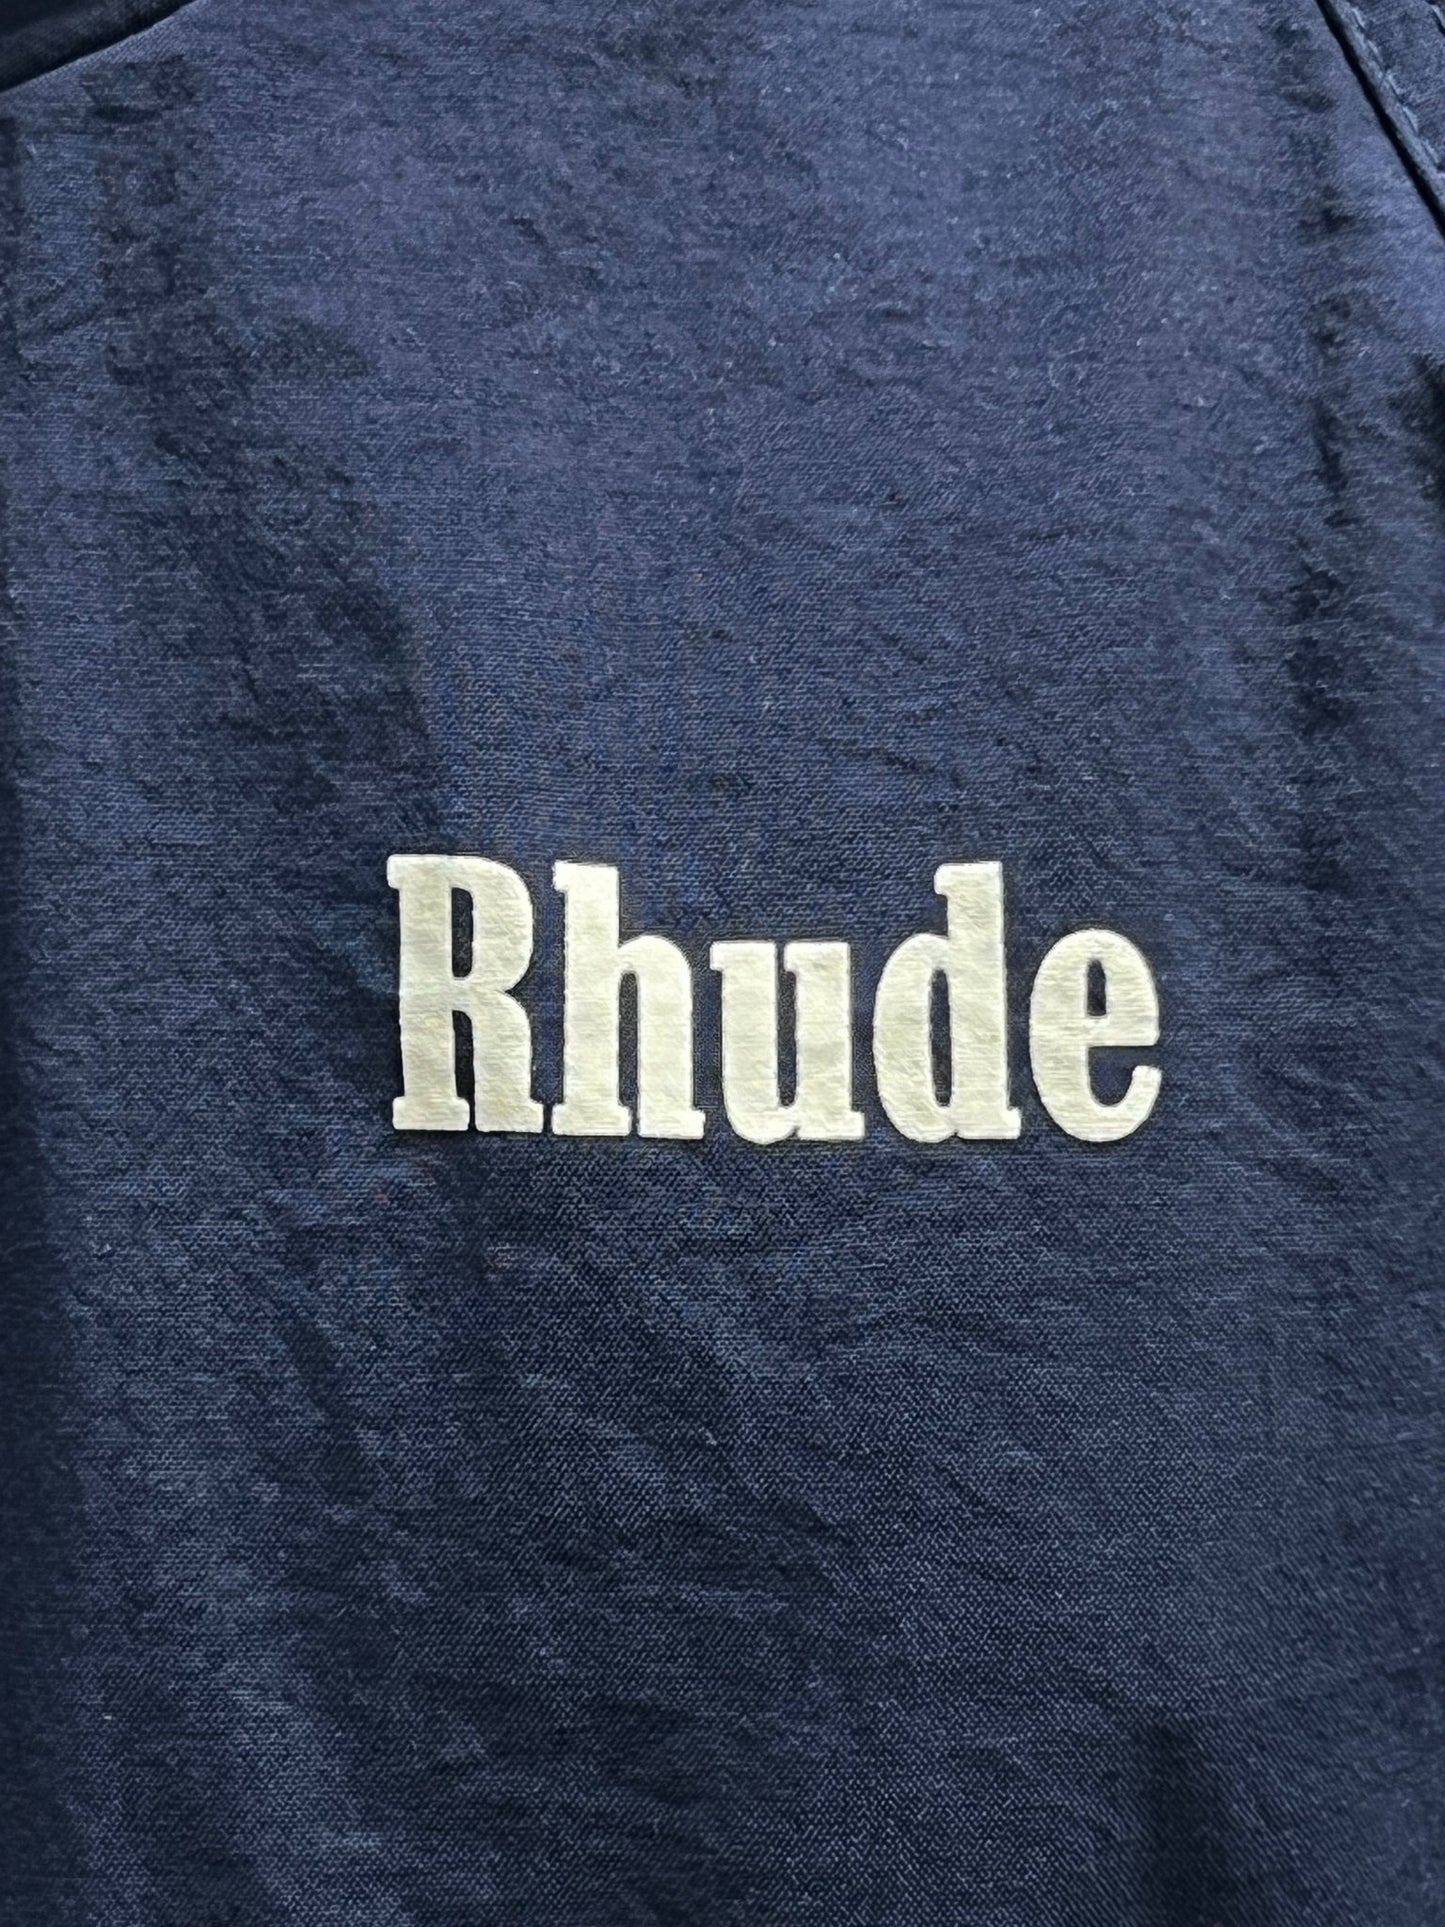 A RHUDE PALM TRACK JACKET NAVY with the RHUDE crest design on it.